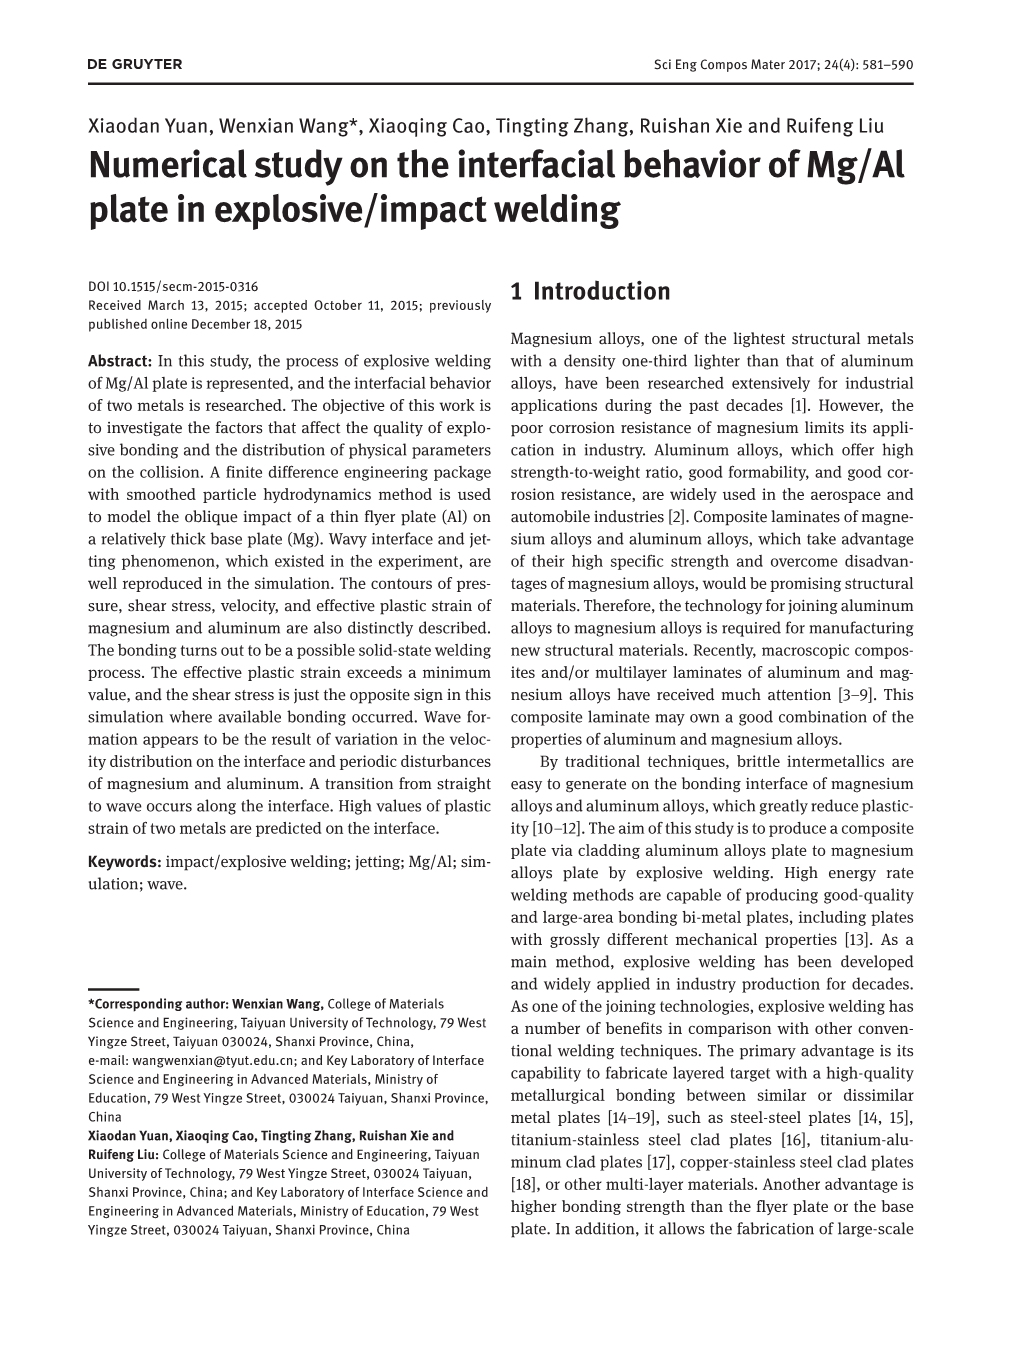 Numerical Study on the Interfacial Behavior of Mg/Al Plate in Explosive/Impact Welding